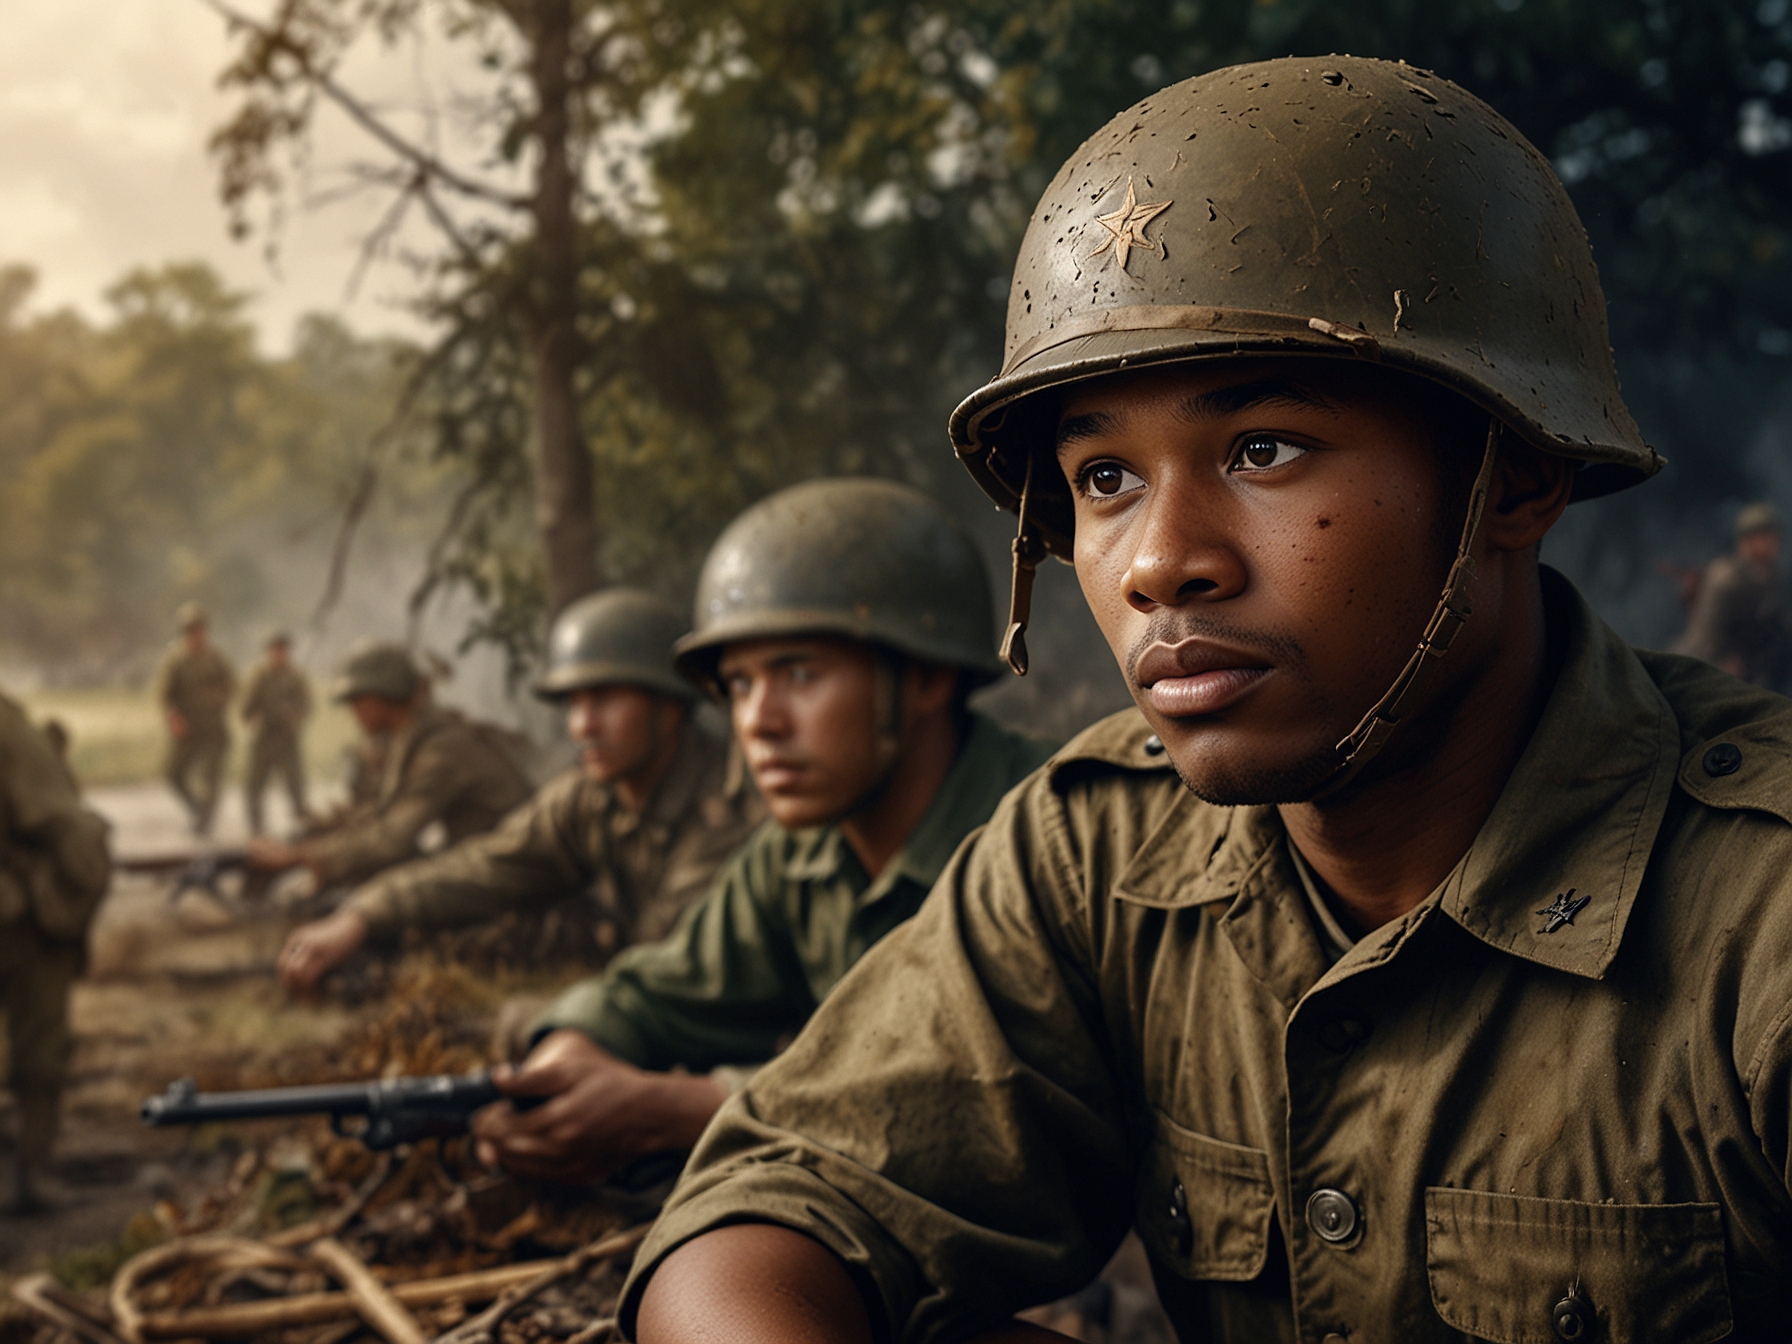 A scene from 'Erased: WW2’s Heroes of Color', featuring authentic World War II archival footage and diverse soldiers, emphasizing the documentary's focus on the bravery and contributions of unsung heroes during the war.